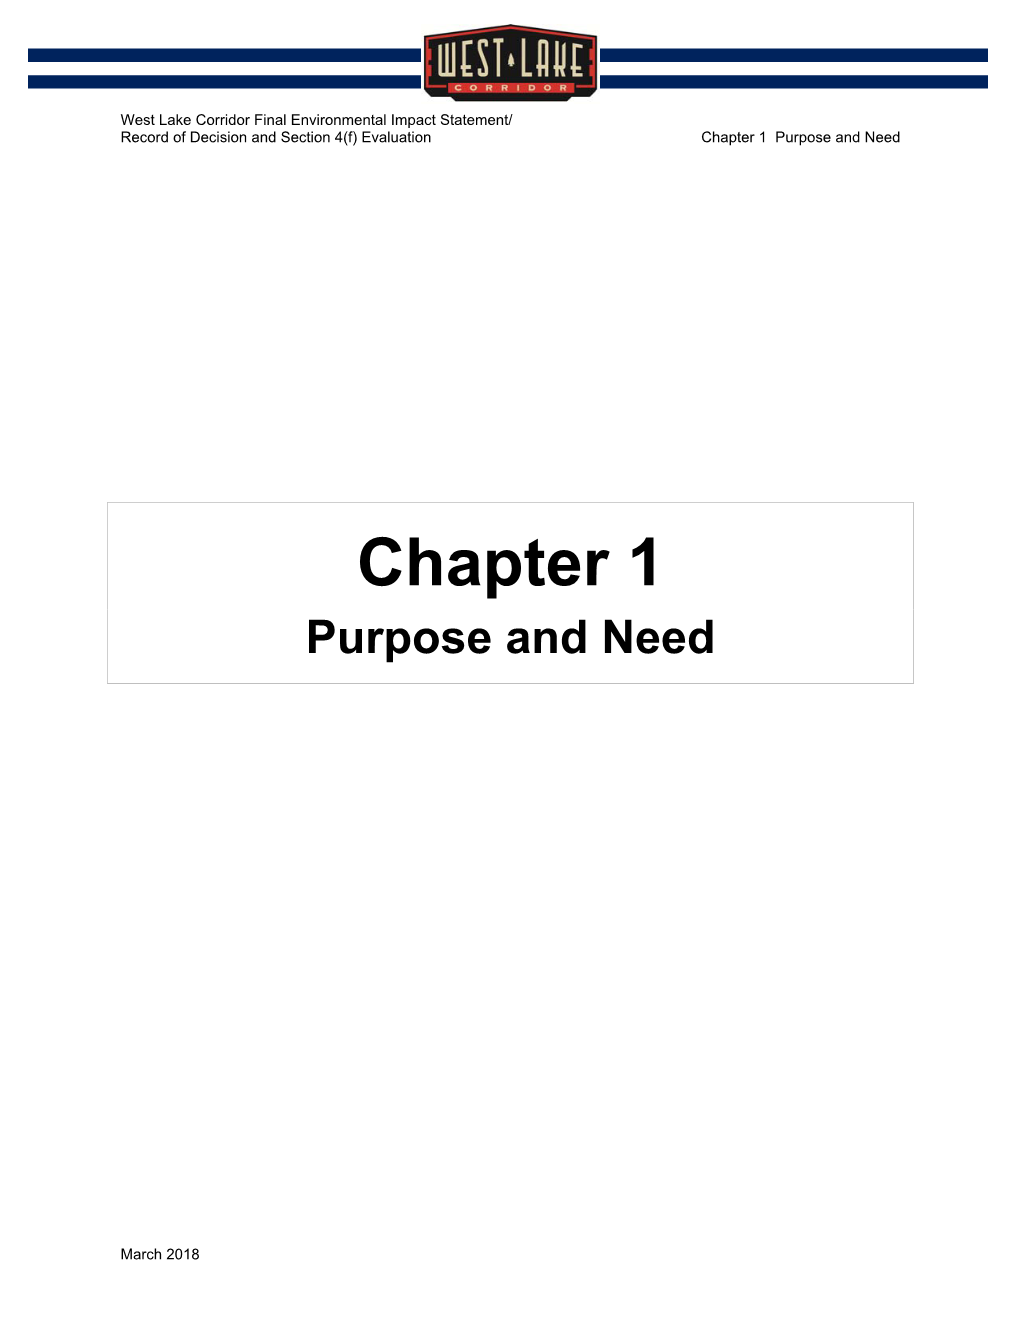 Chapter 1 Purpose and Need